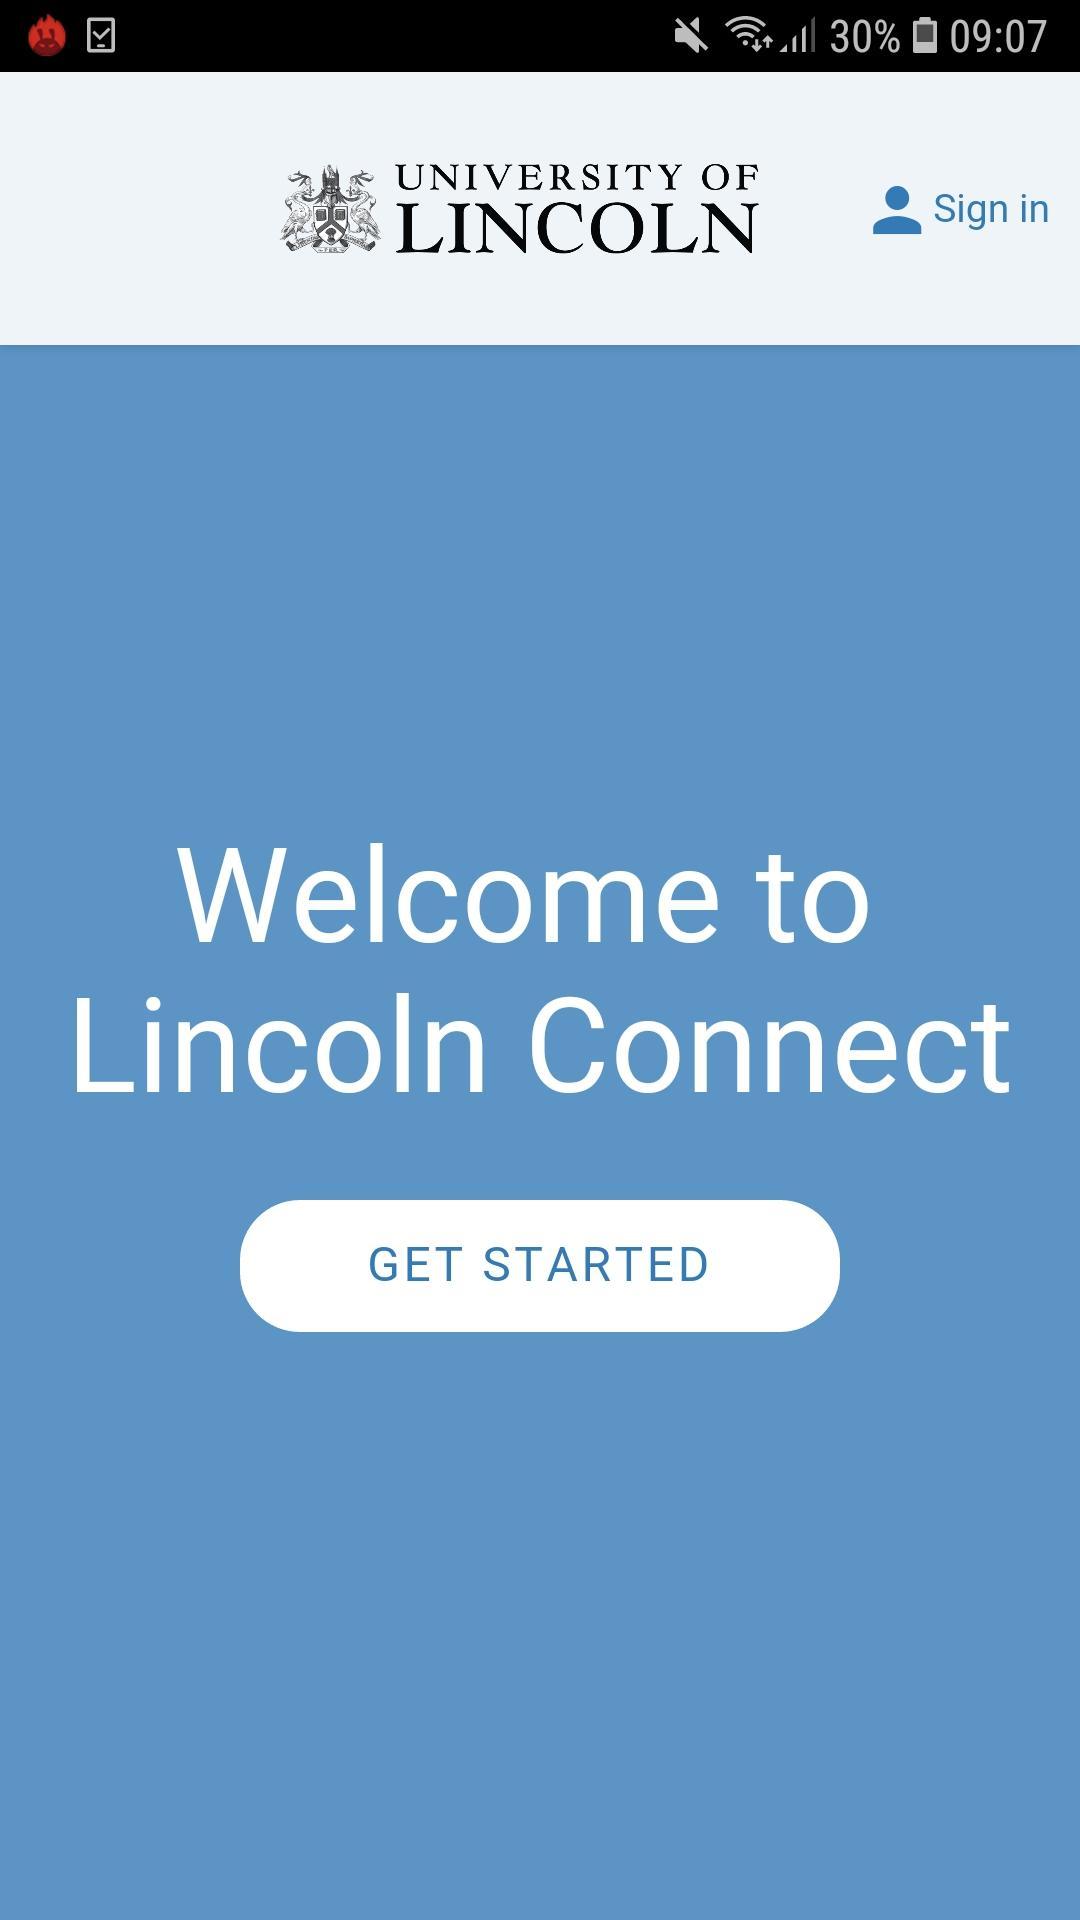 Lincoln Connect 202000.323.21 Screenshot 1